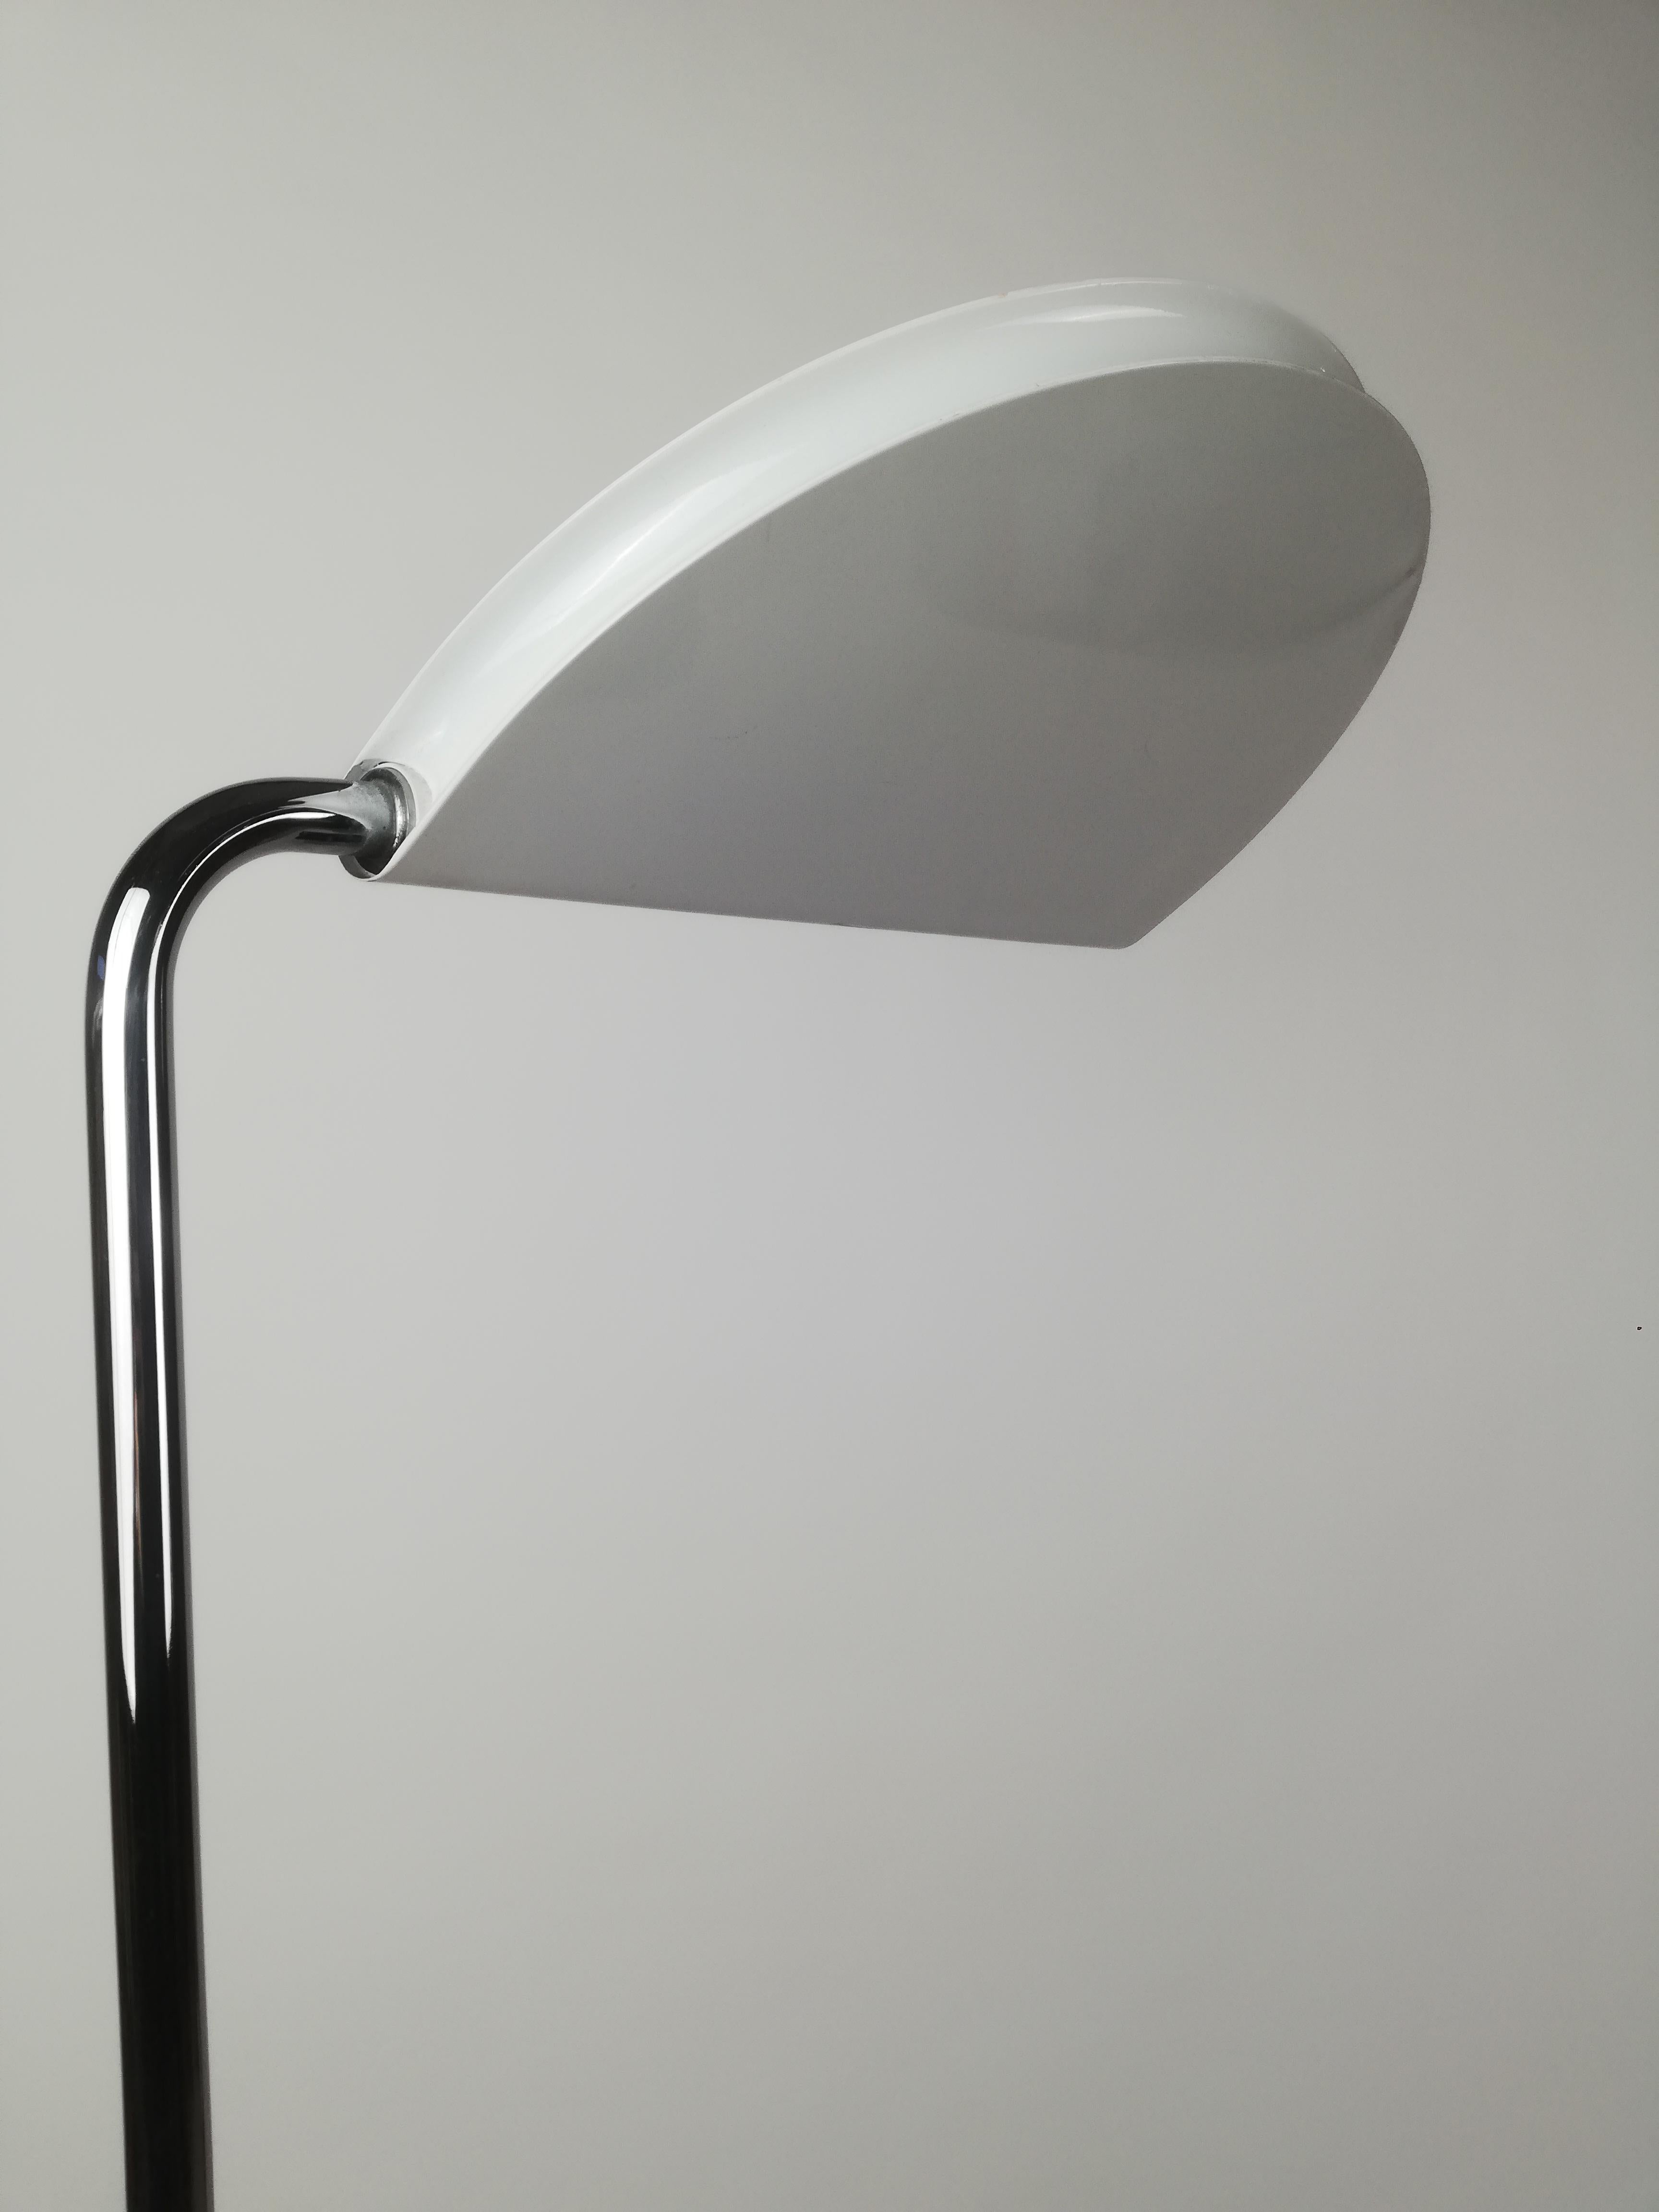 A slim and elegant floor lamp, designed in 1970 by Bruno Gecchelin for Skypper.
The advent of the halogen lamp has revolutionized lighting not only in a technical sense but also in style.
The power of the halogen lamp with the possibility of being